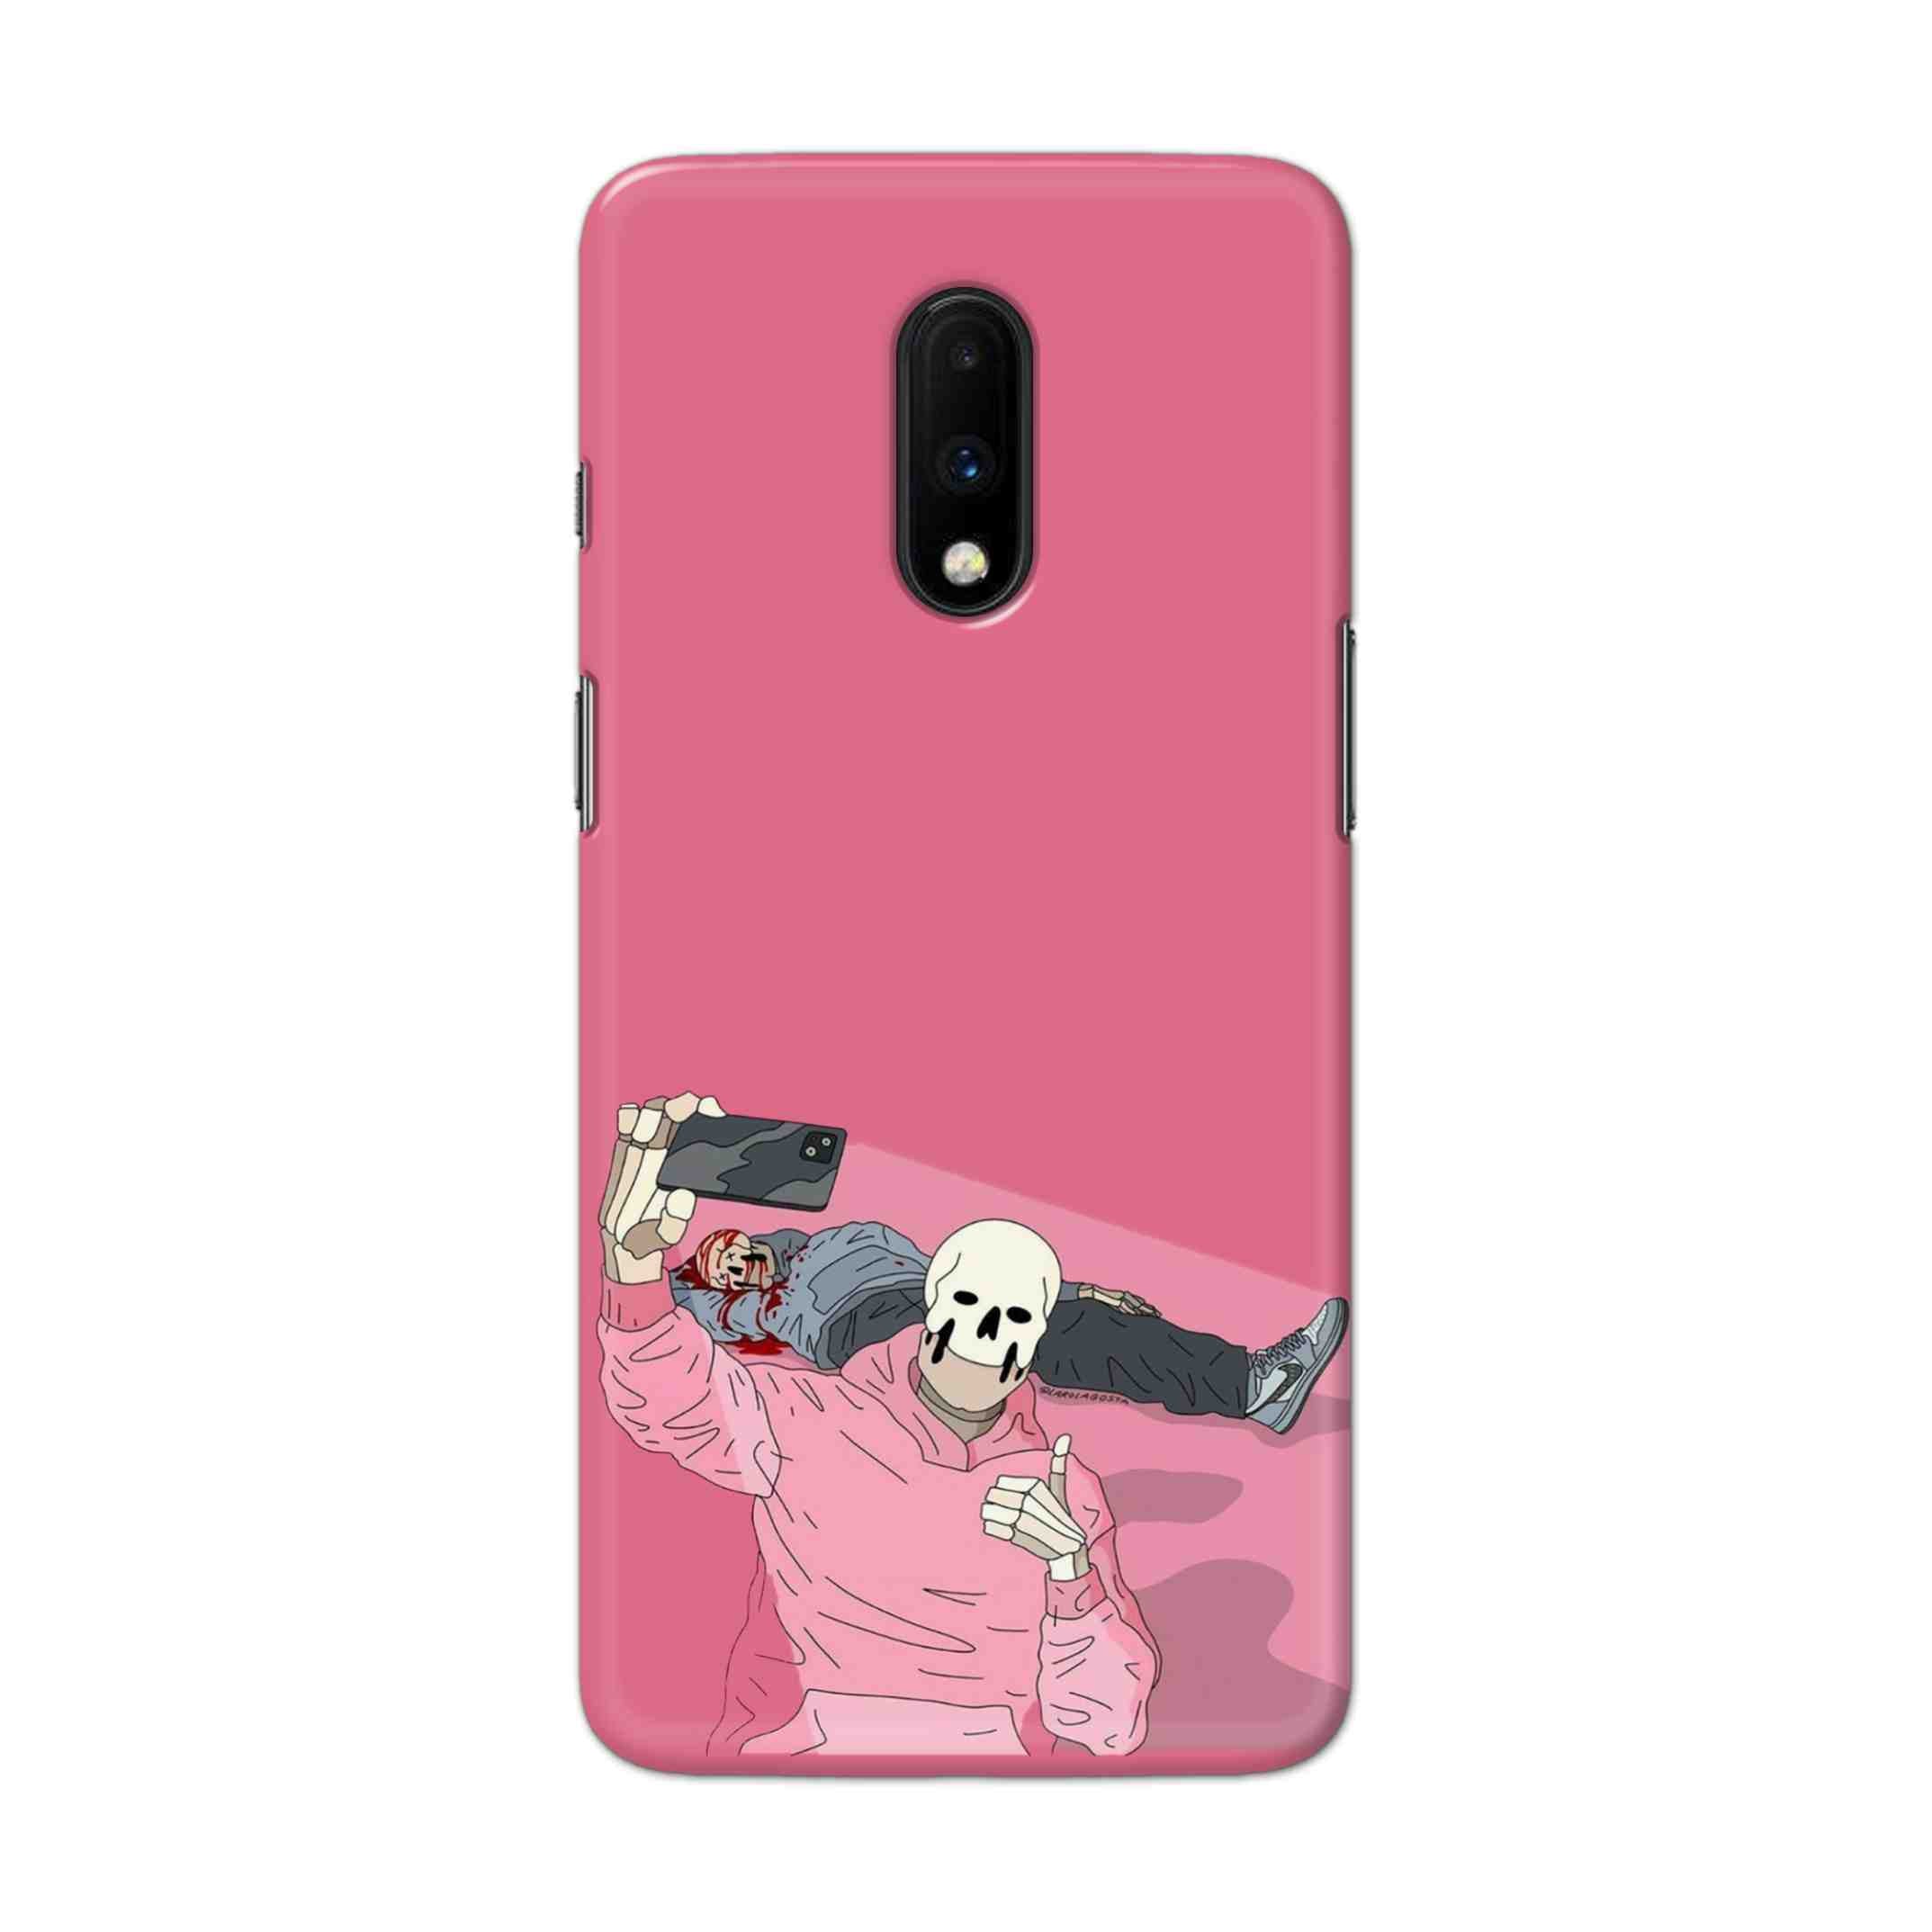 Buy Selfie Hard Back Mobile Phone Case Cover For OnePlus 7 Online